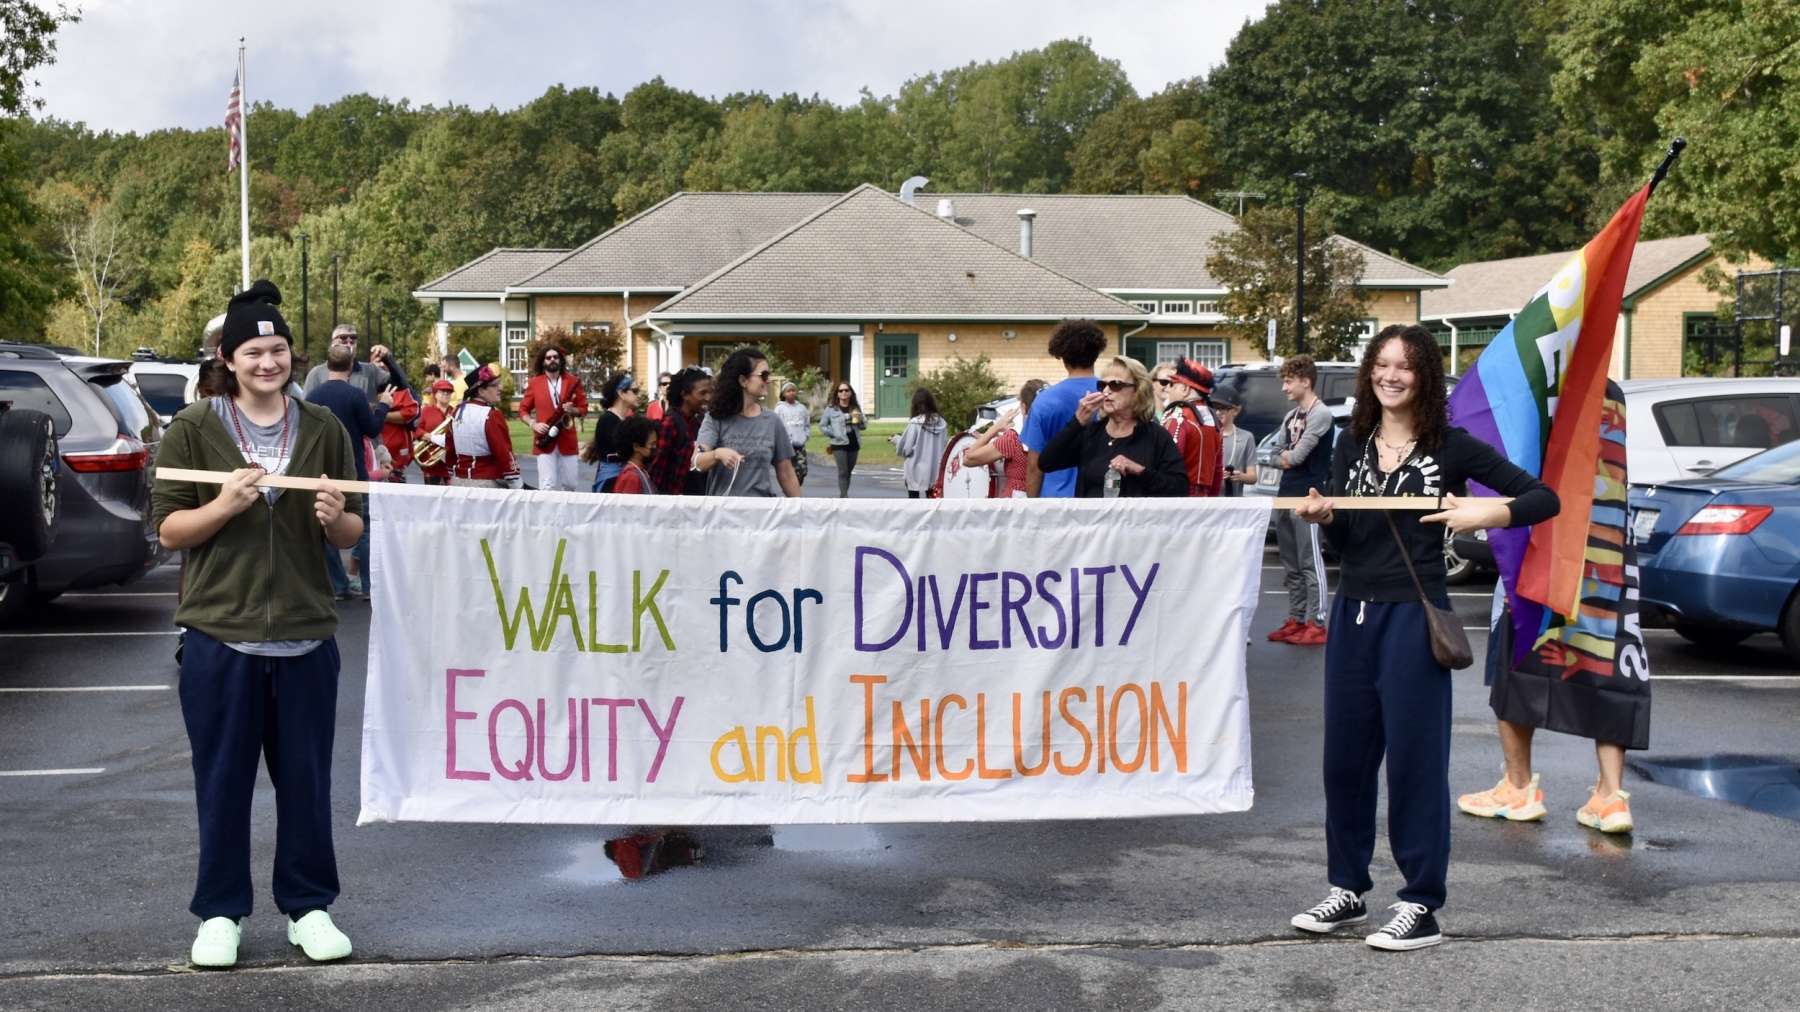 Smithfield’s Walk for Diversity, Equity and Inclusion